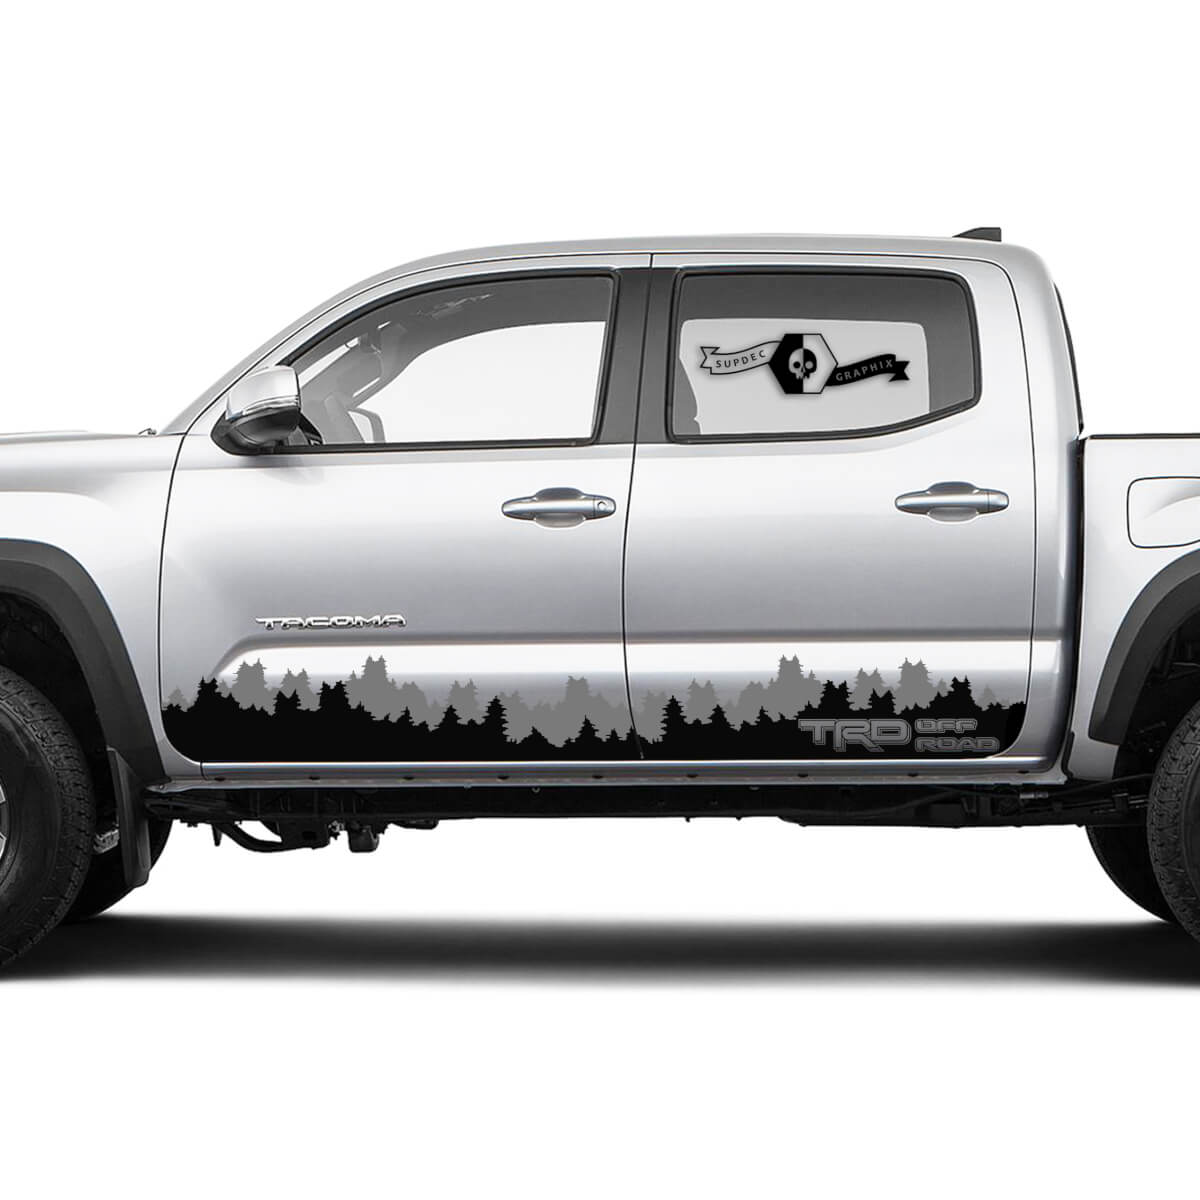 2 TRD Off Road Rocker Panel Mountain 2 Colors Vinyl Stickers TOYOTA Decals Stickers for Tacoma Tundra 4Runner Hilux